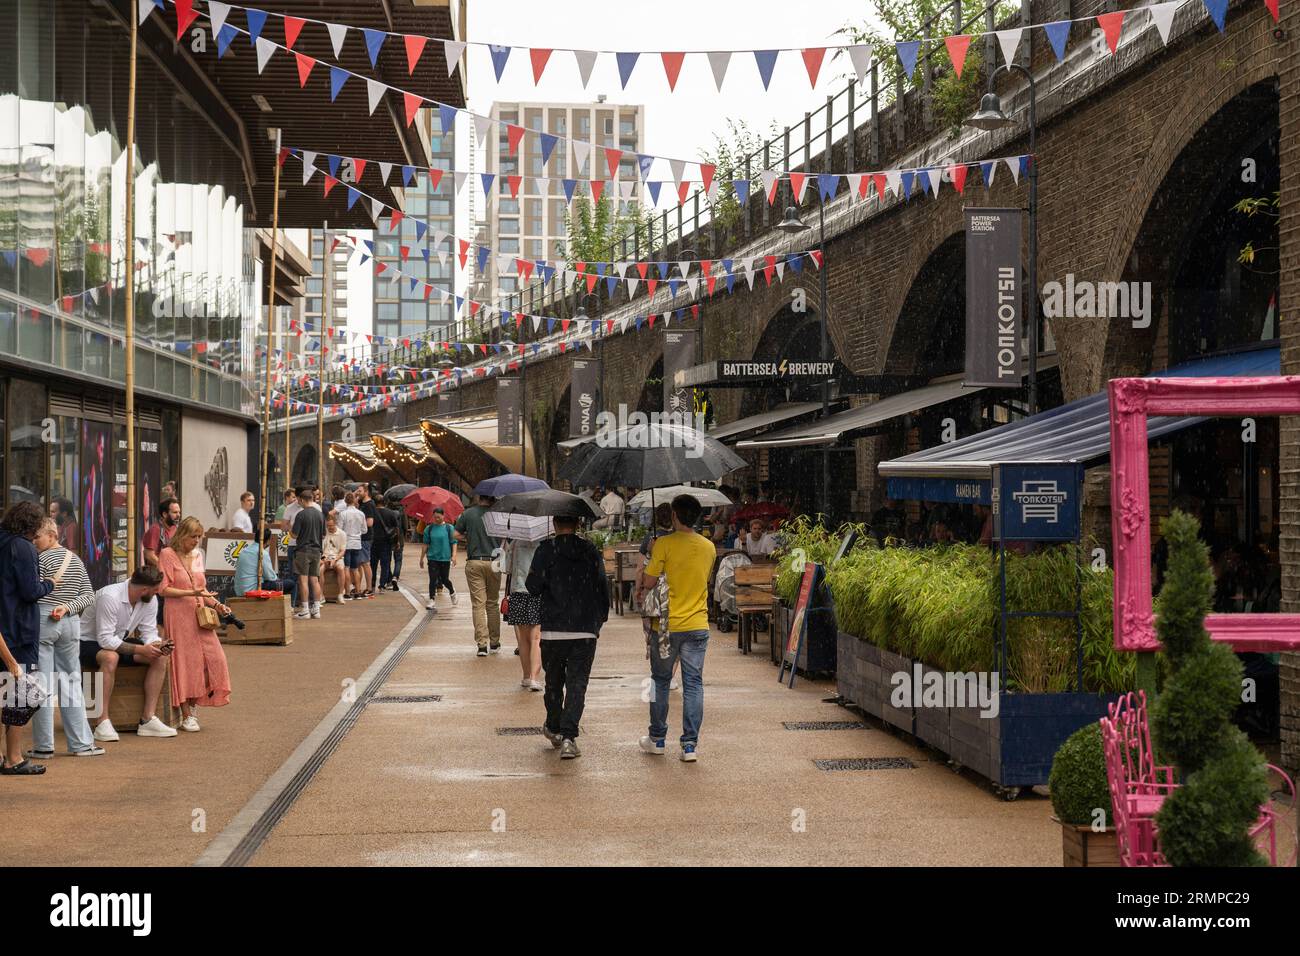 People walking in the rain and holding umbrellas on Arches Lane near Battersea Power Station next to various restaurants and bars. London, England Stock Photo